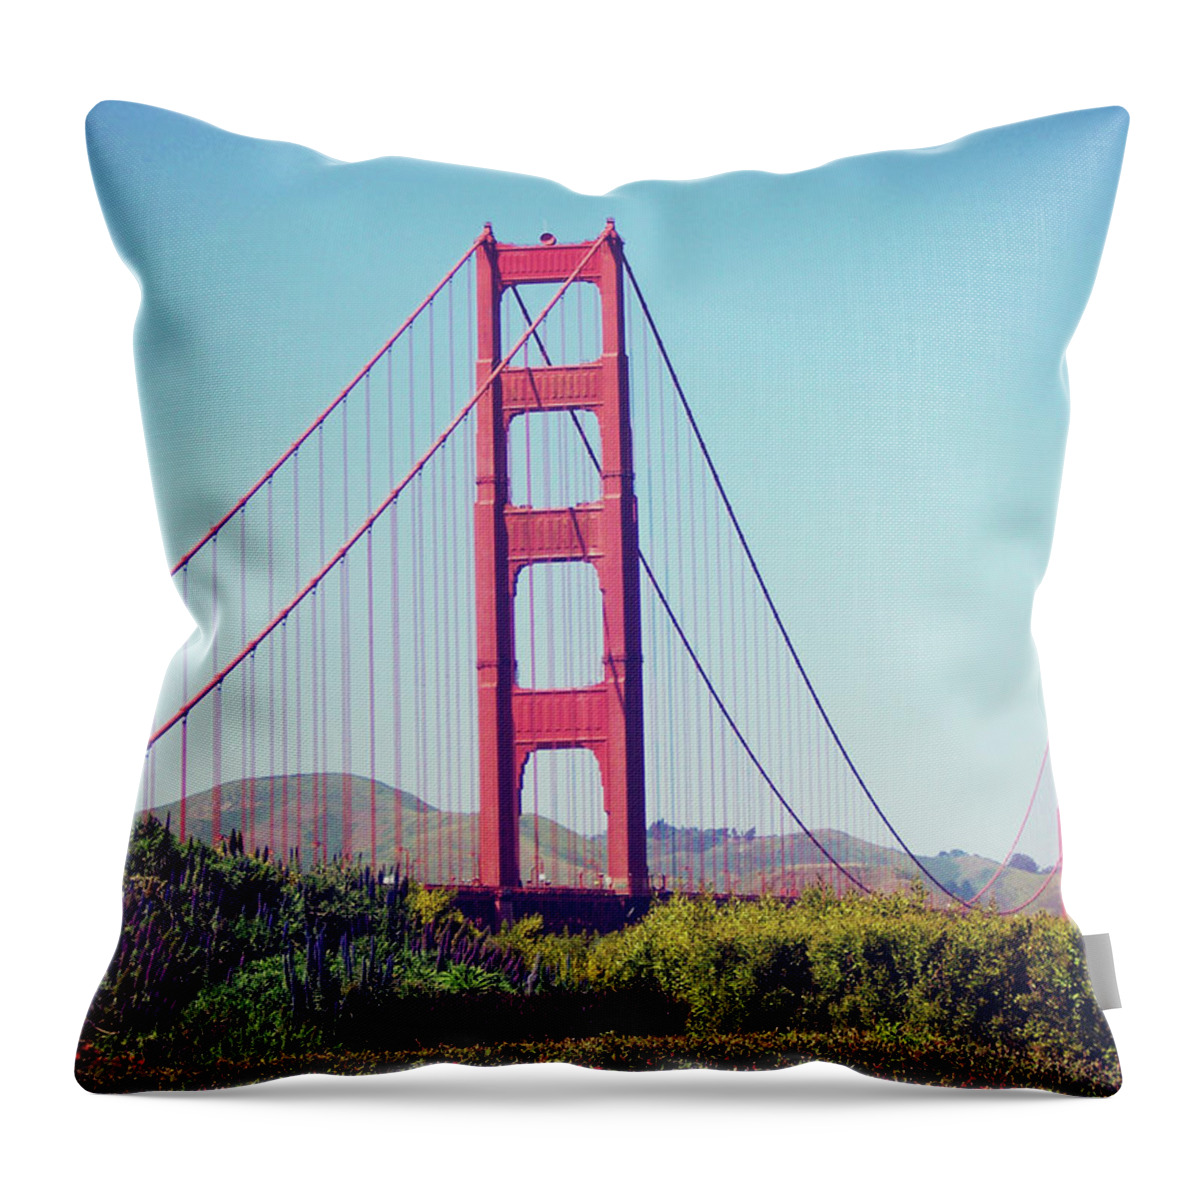 Tranquility Throw Pillow featuring the photograph San Francisco Golden Gate Bridge by By Melisa Anger